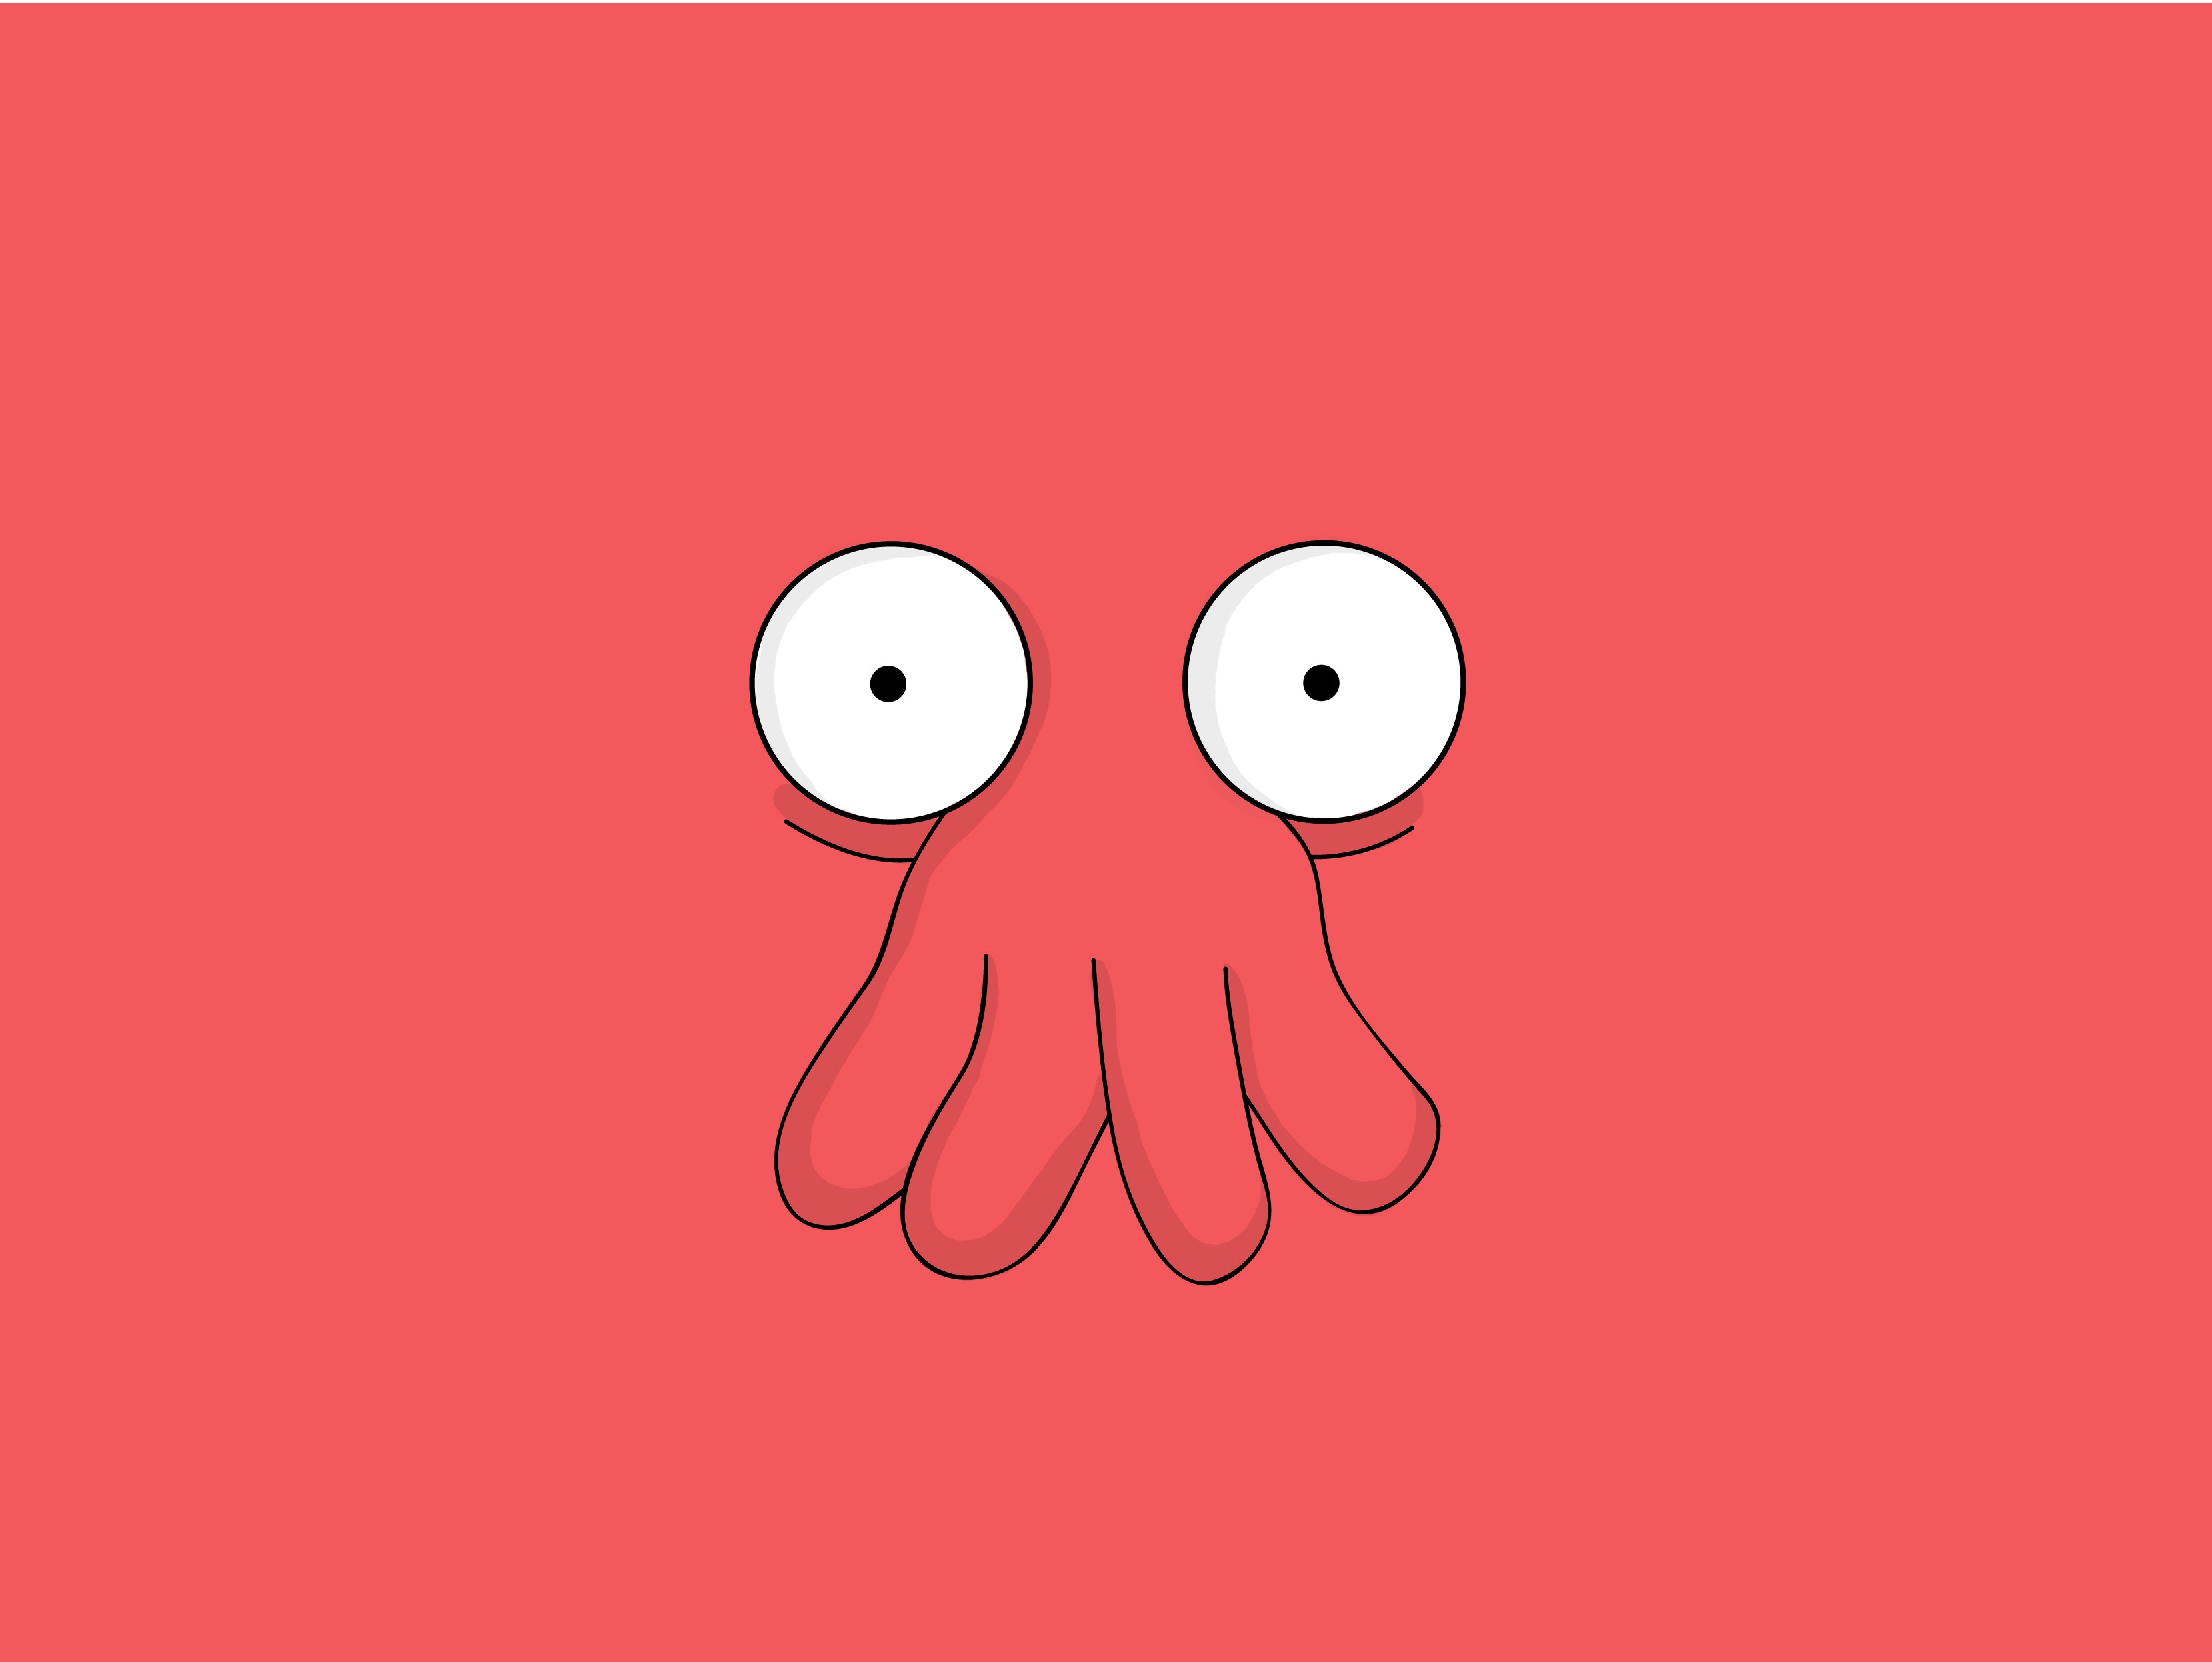 General 3317x2492 Zoidberg Futurama minimalism TV series science fiction red background simple background